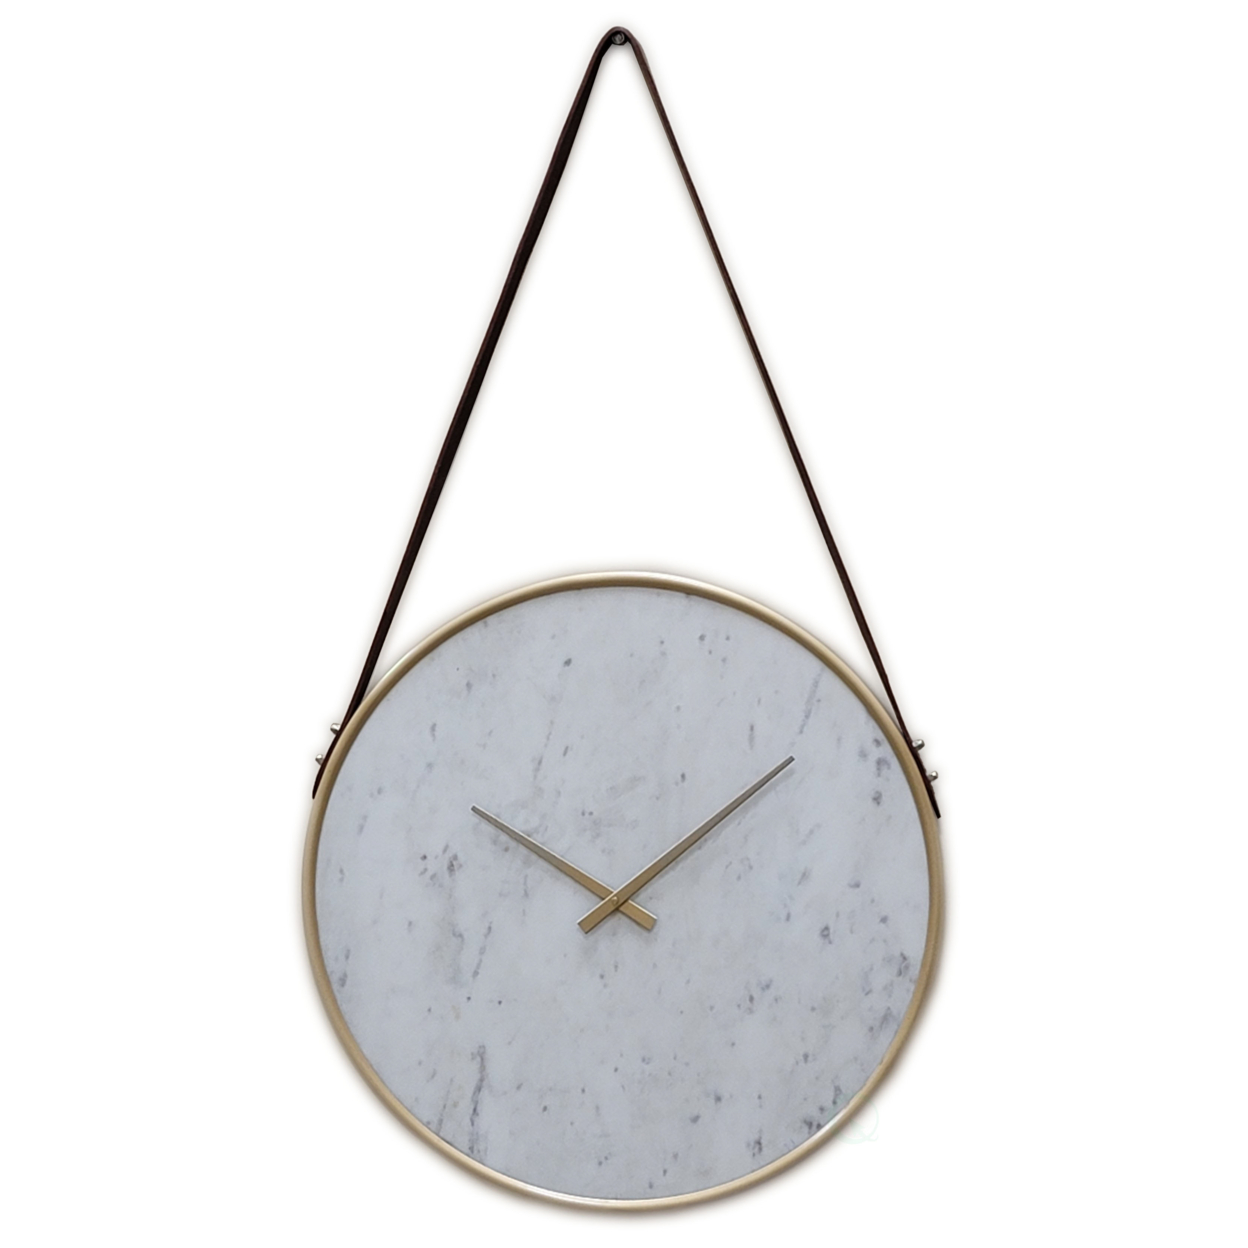 Decorative Contemporary Metal Wall Clock Marble Look Face, Gold Rim and Handles with Hanging Band